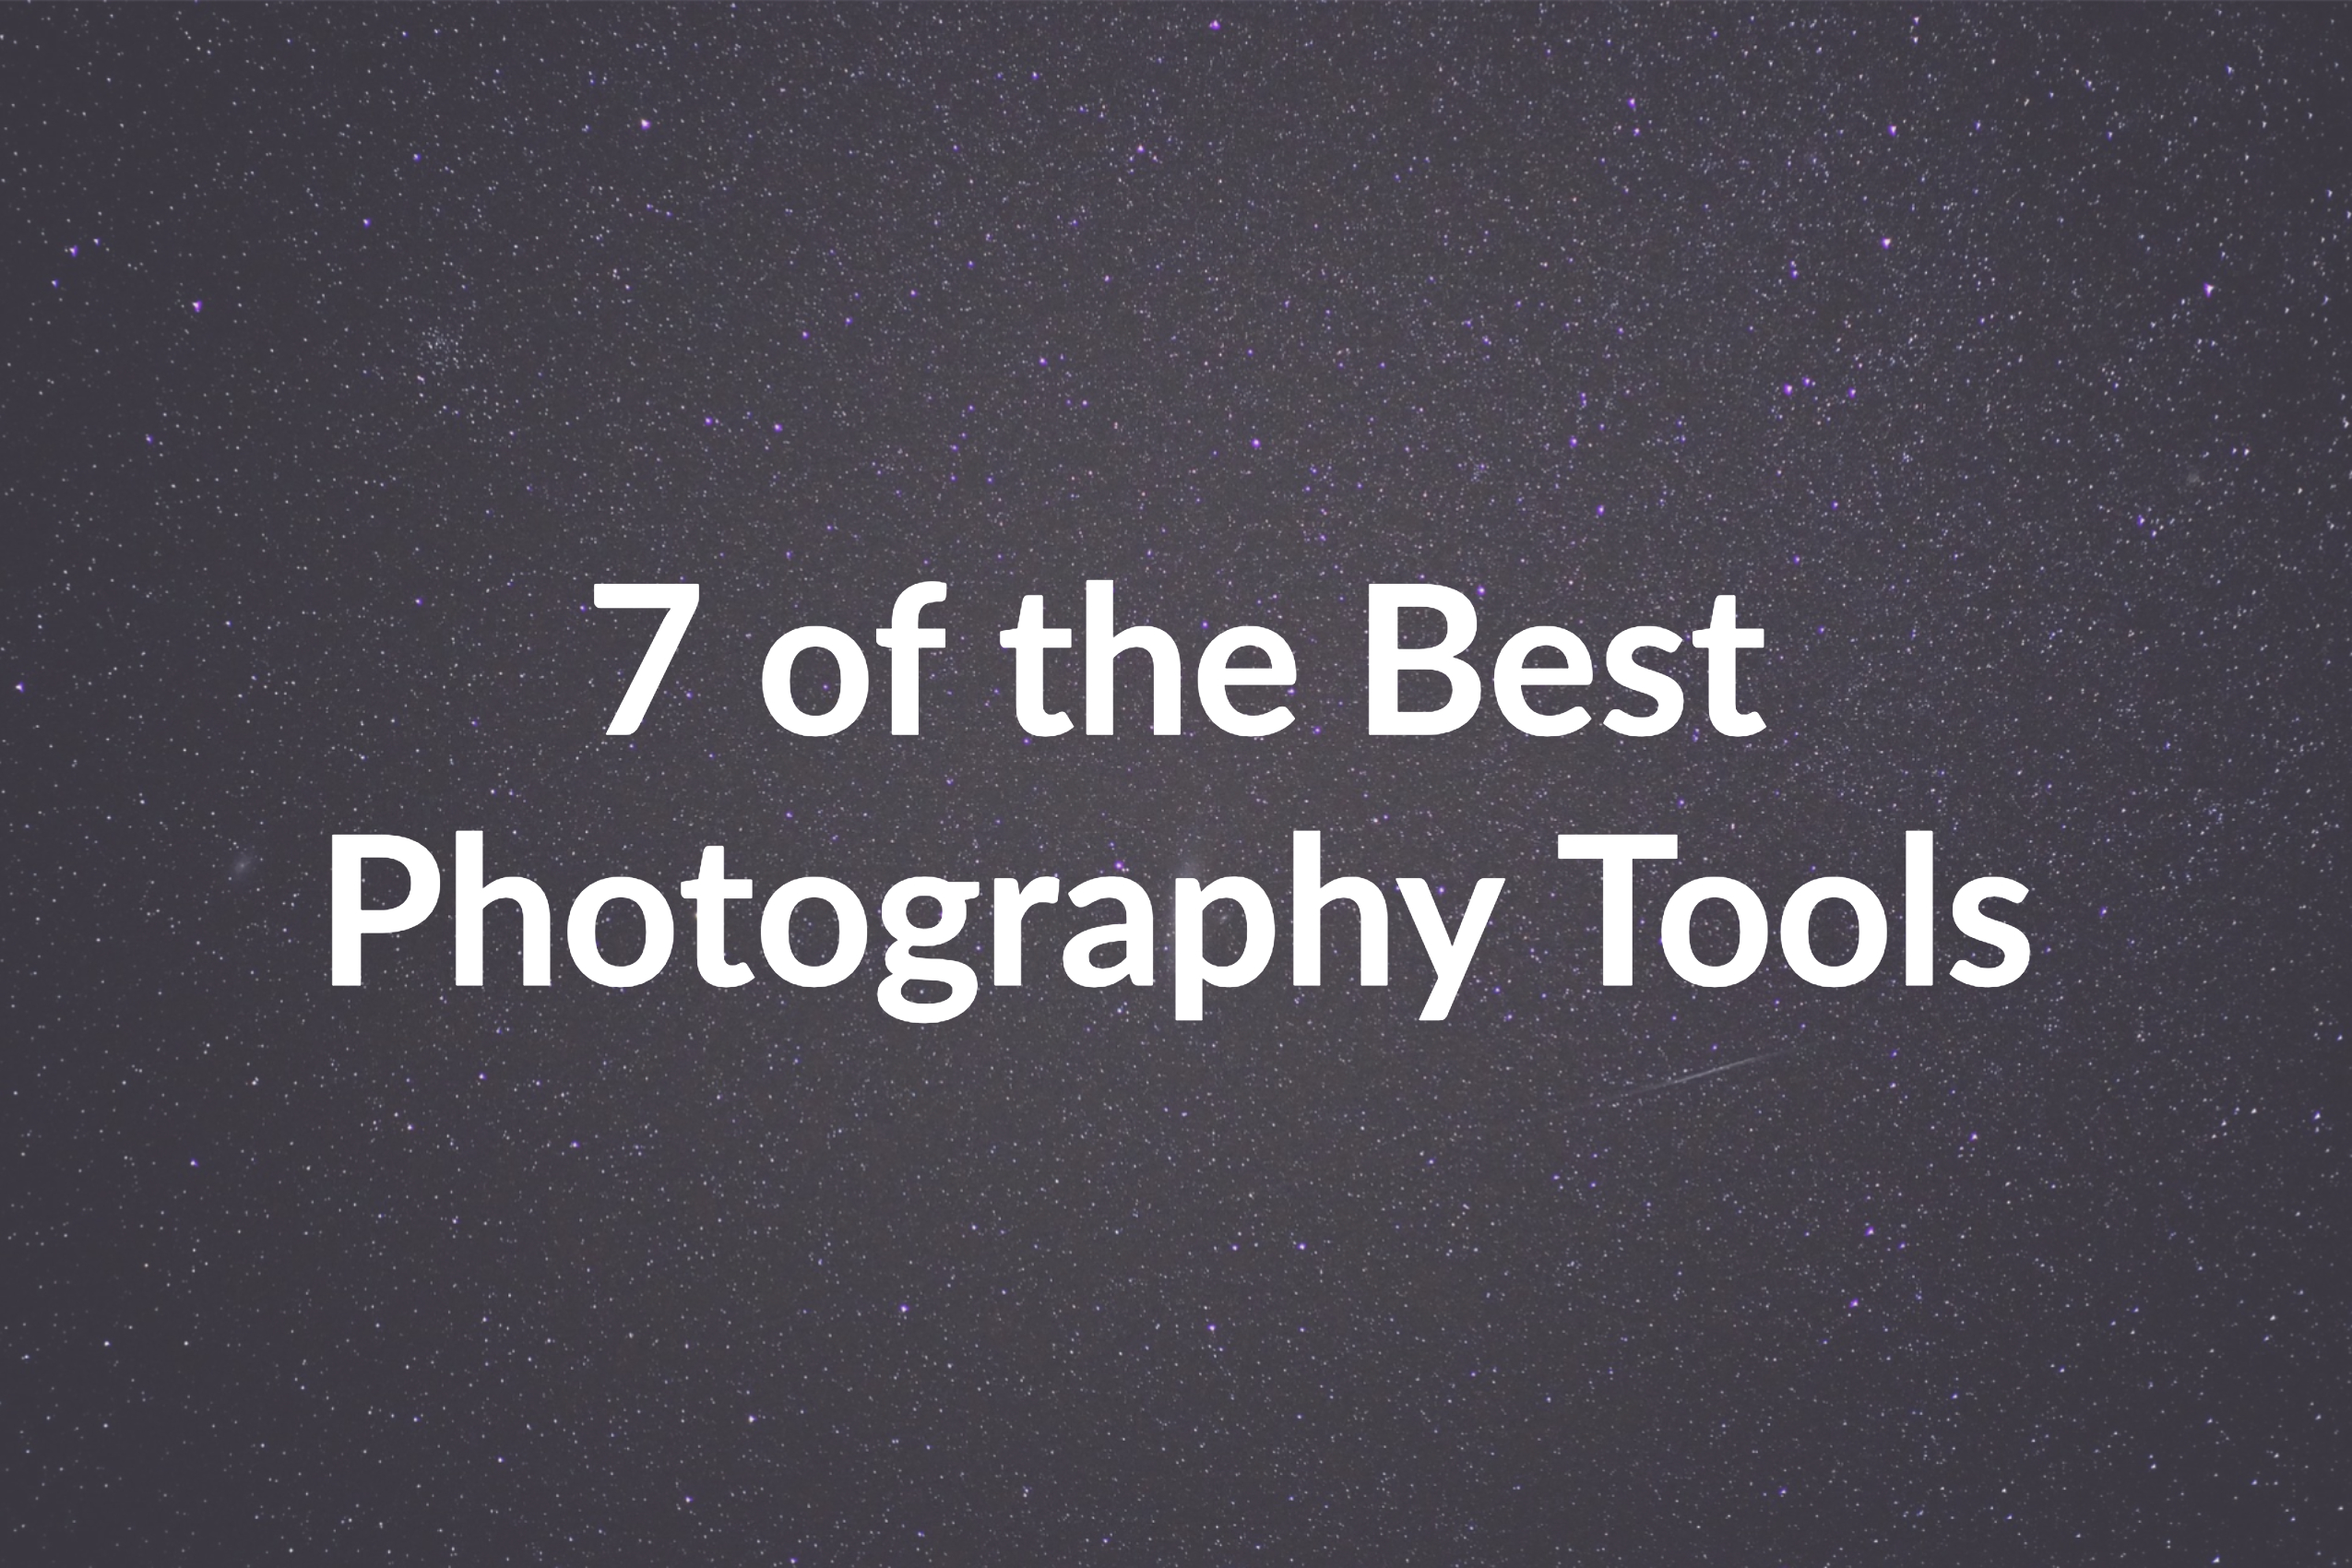 7 Best Photography Tools That the Top Pro Photographers Use